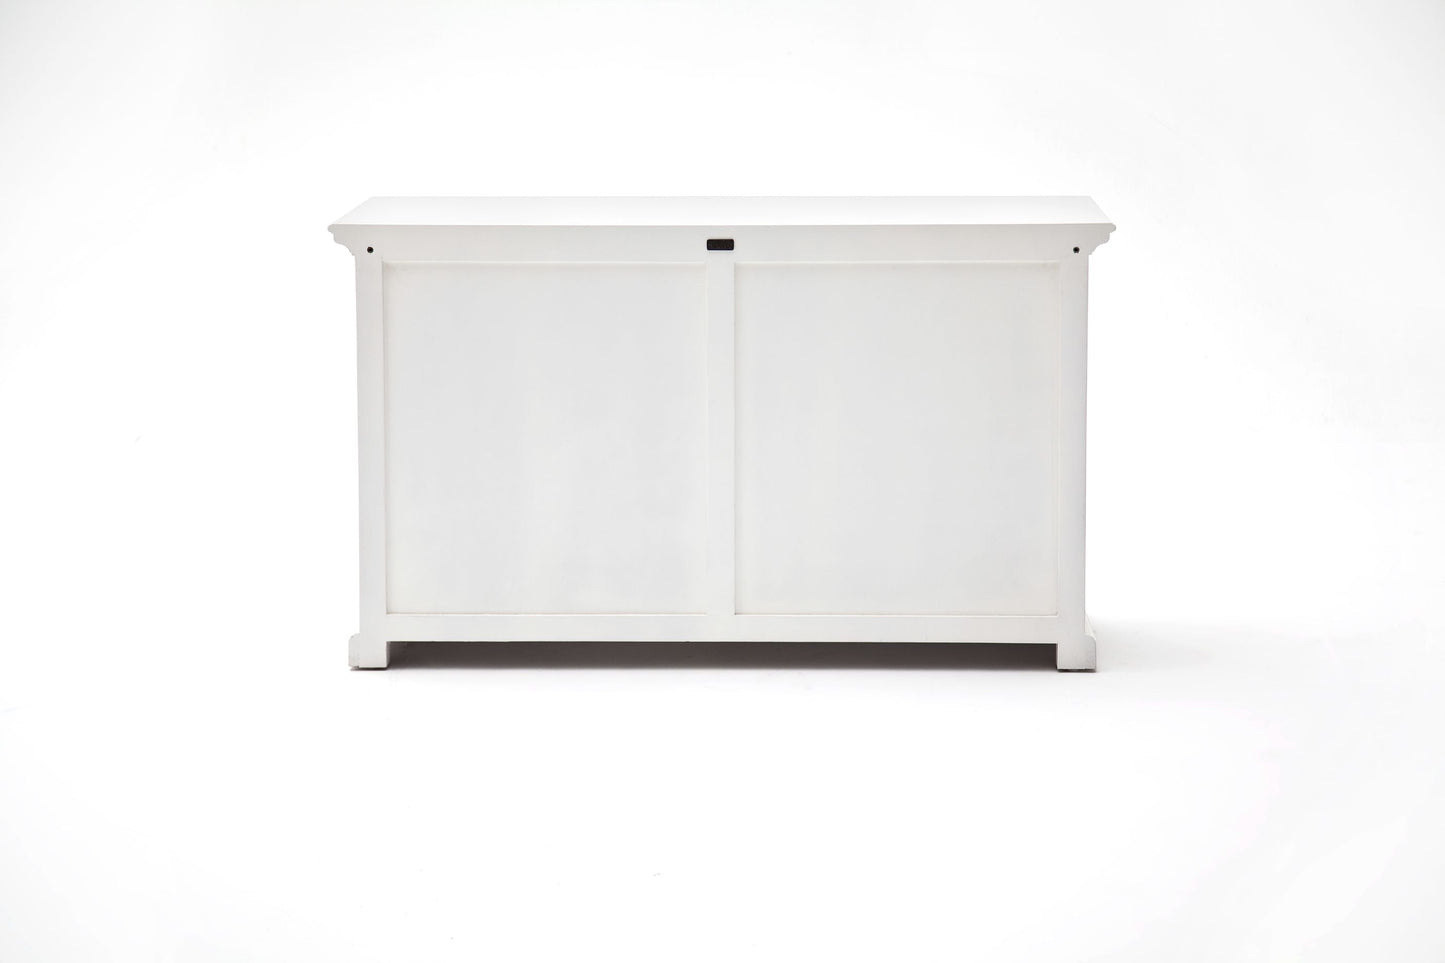 NovaSolo Provence 57" Classic White Mahogany Buffet With 4 Doors & 2 Drawers